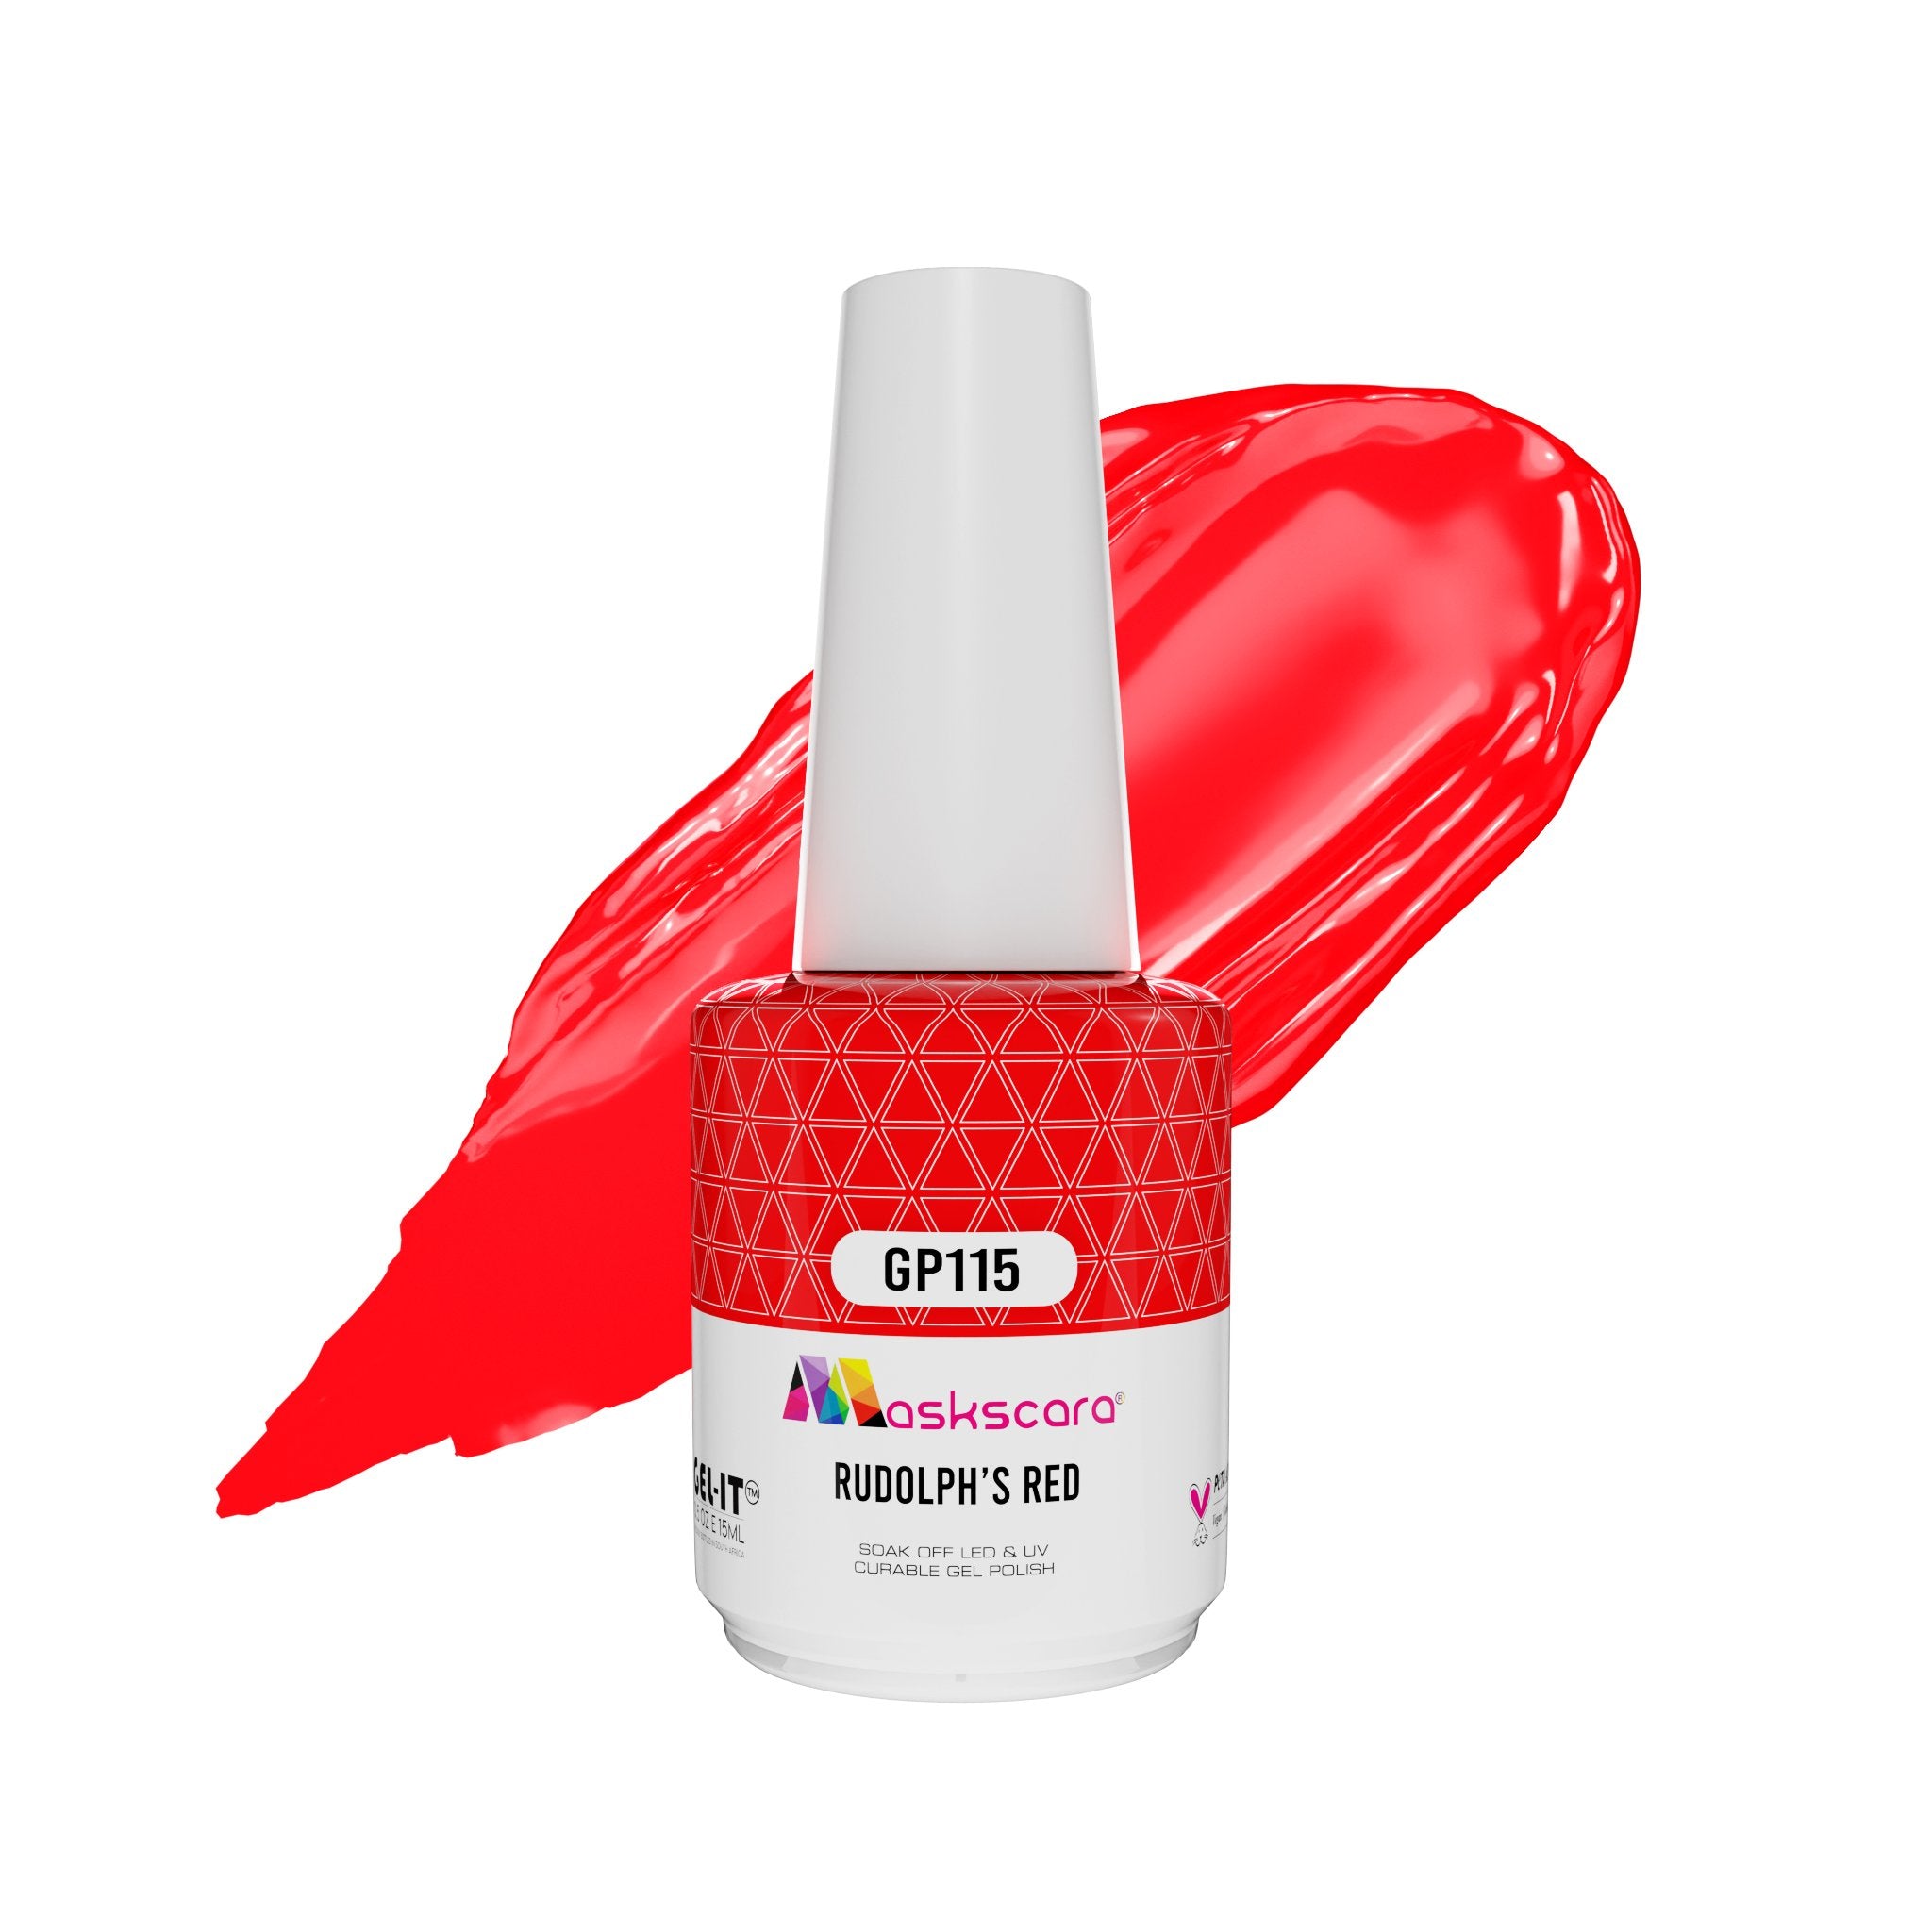 <img scr = “ GP115 Rudolph's Red.jpeg” alt = “Neon Red gel polish colour by the brand Maskscara”>